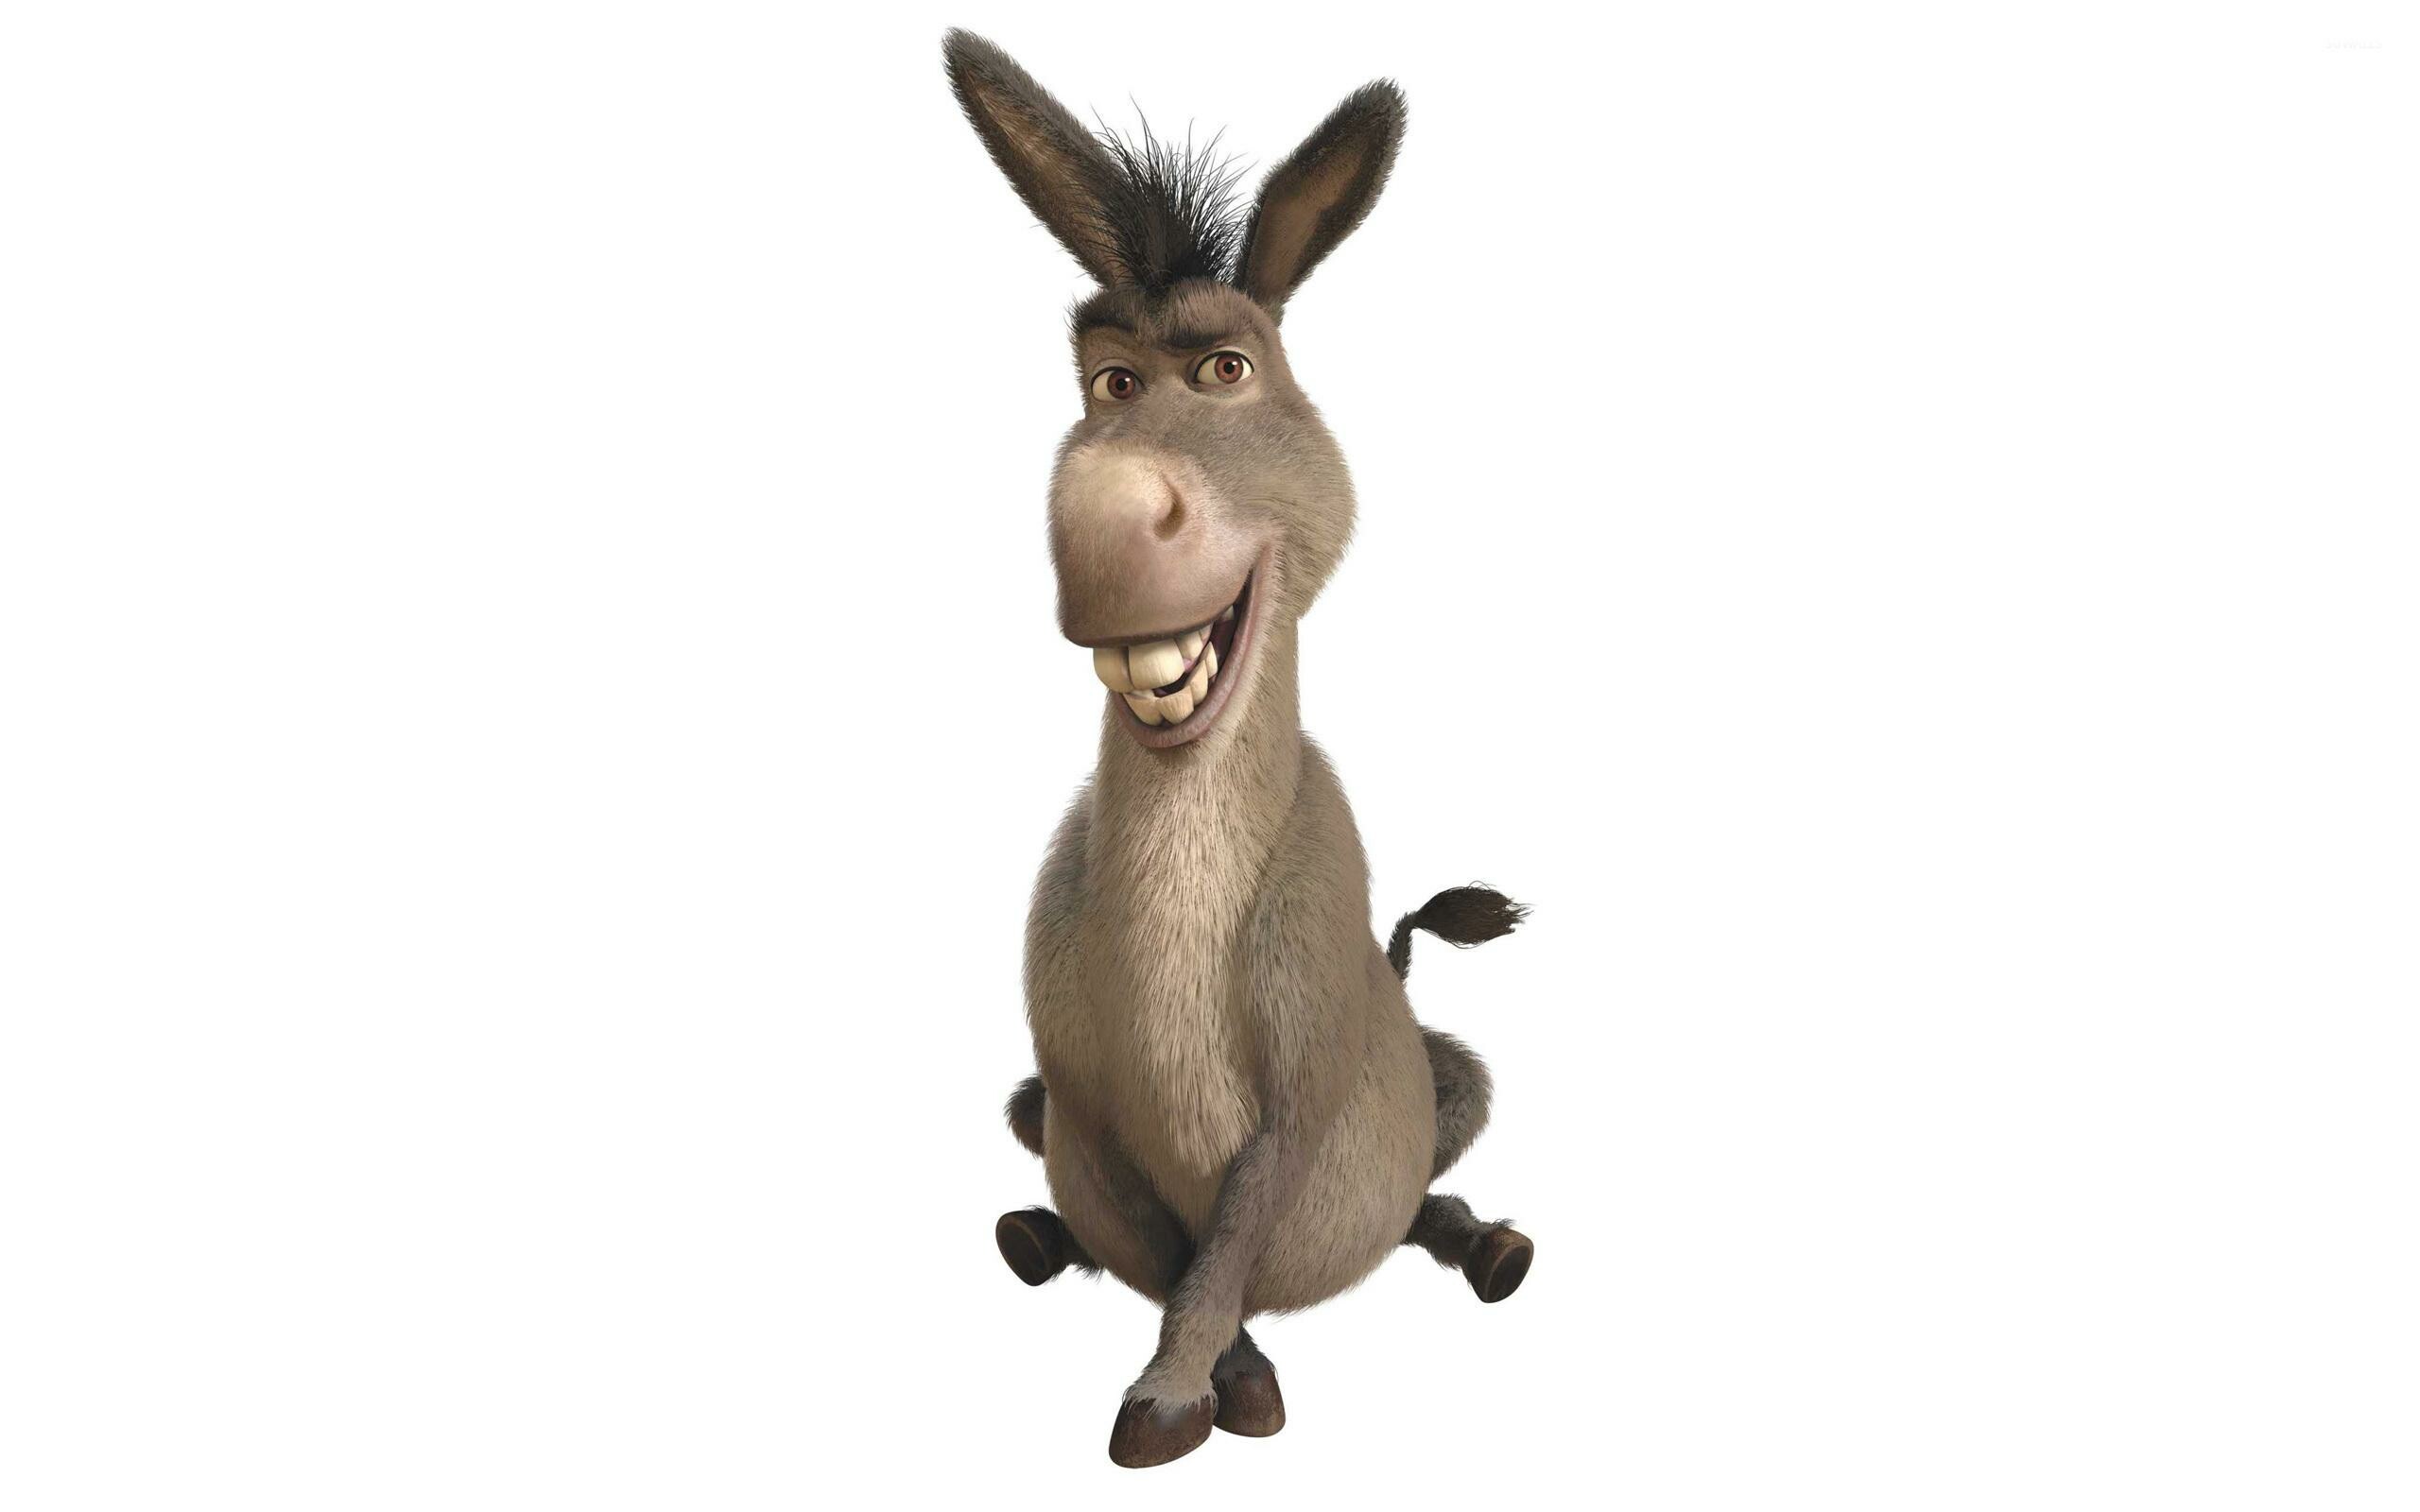 Shrek: Eddie Murphy as Donkey, His appearance is modeled after a miniature donkey named Perry. 2560x1600 HD Wallpaper.